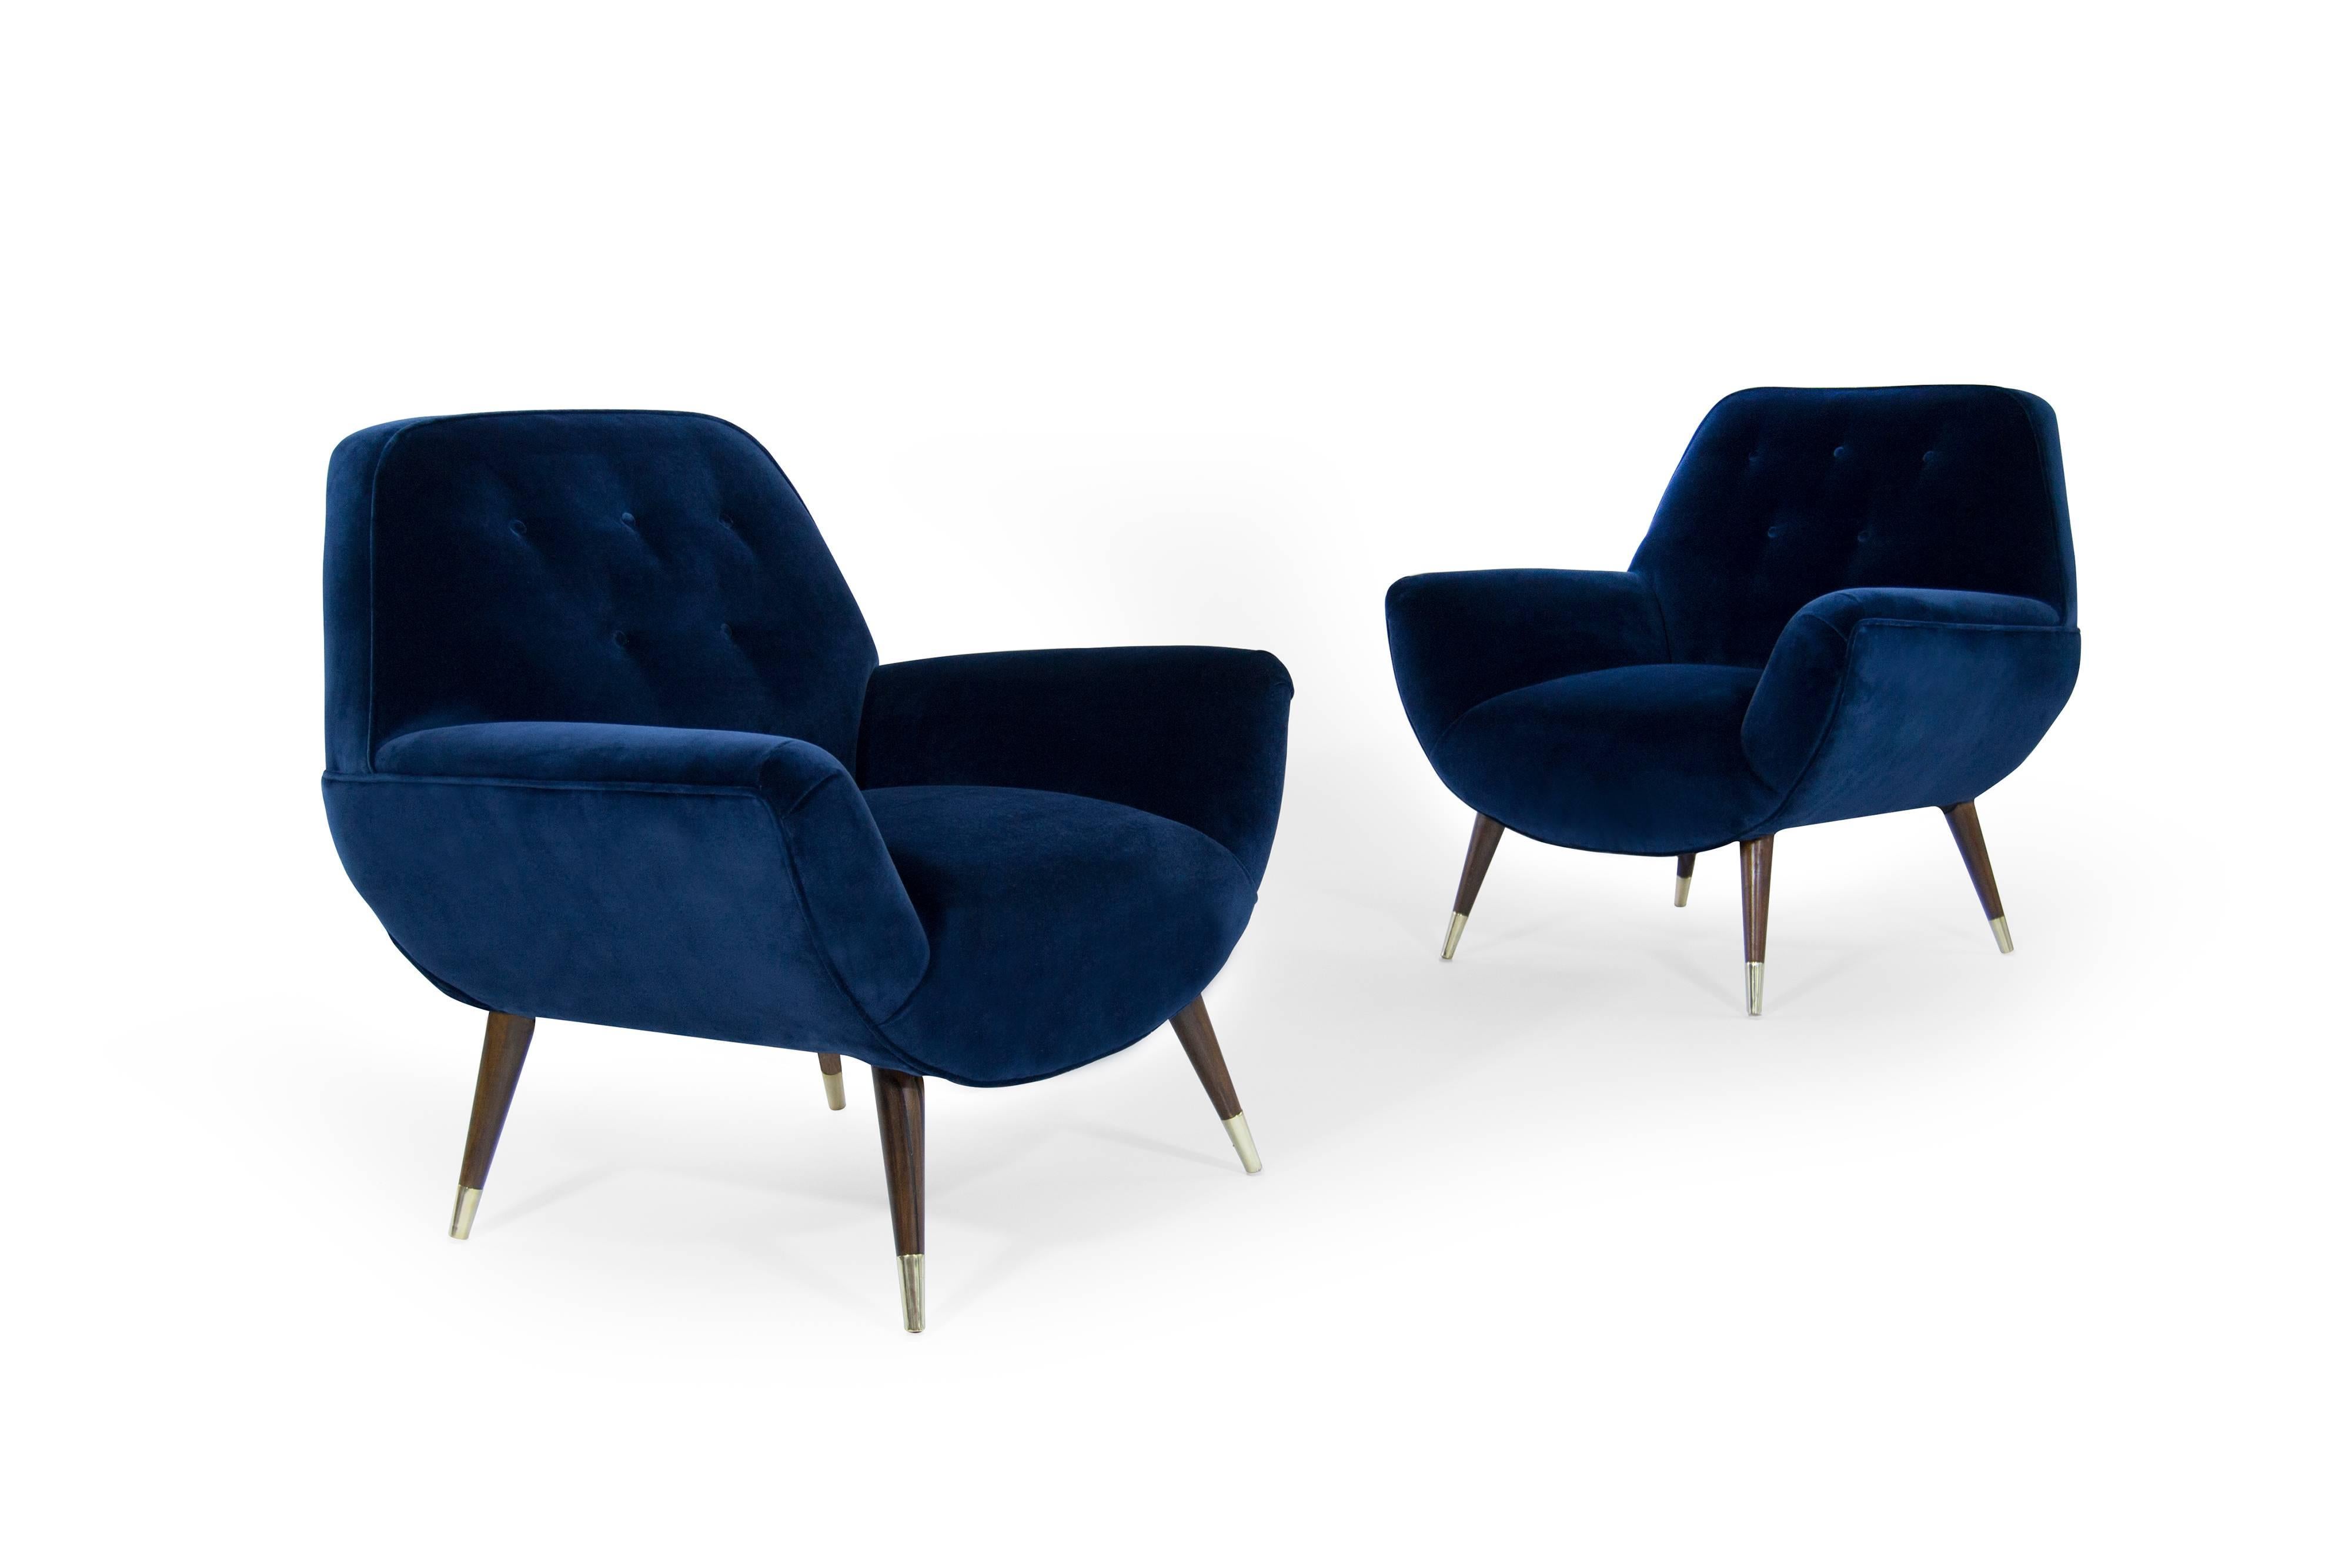 Stunning pair of lounge chairs featuring walnut splayed legs ending brass sabots. Newly upholstered in navy blue velvet. Legs fully restored, brass hand polished.